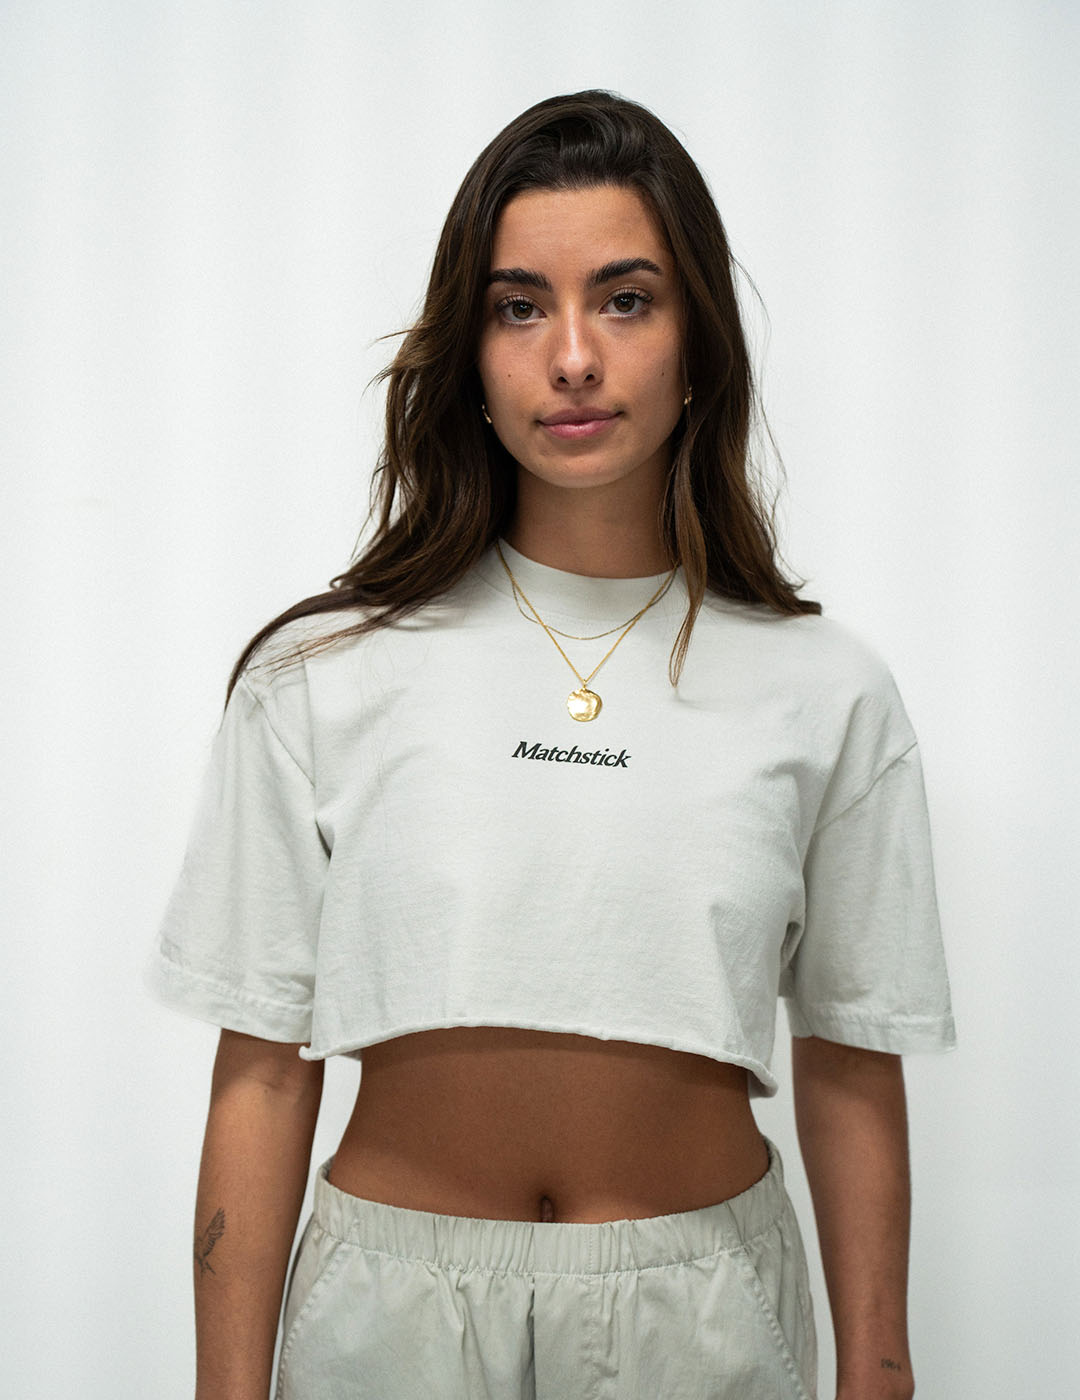 Long Sleeve White and Black Baseball Crop Top, Cropped Baseball Tee, Raglan Crop  Top, Cropped Top, Crop Tops for Women, Crop Tee, -  Canada